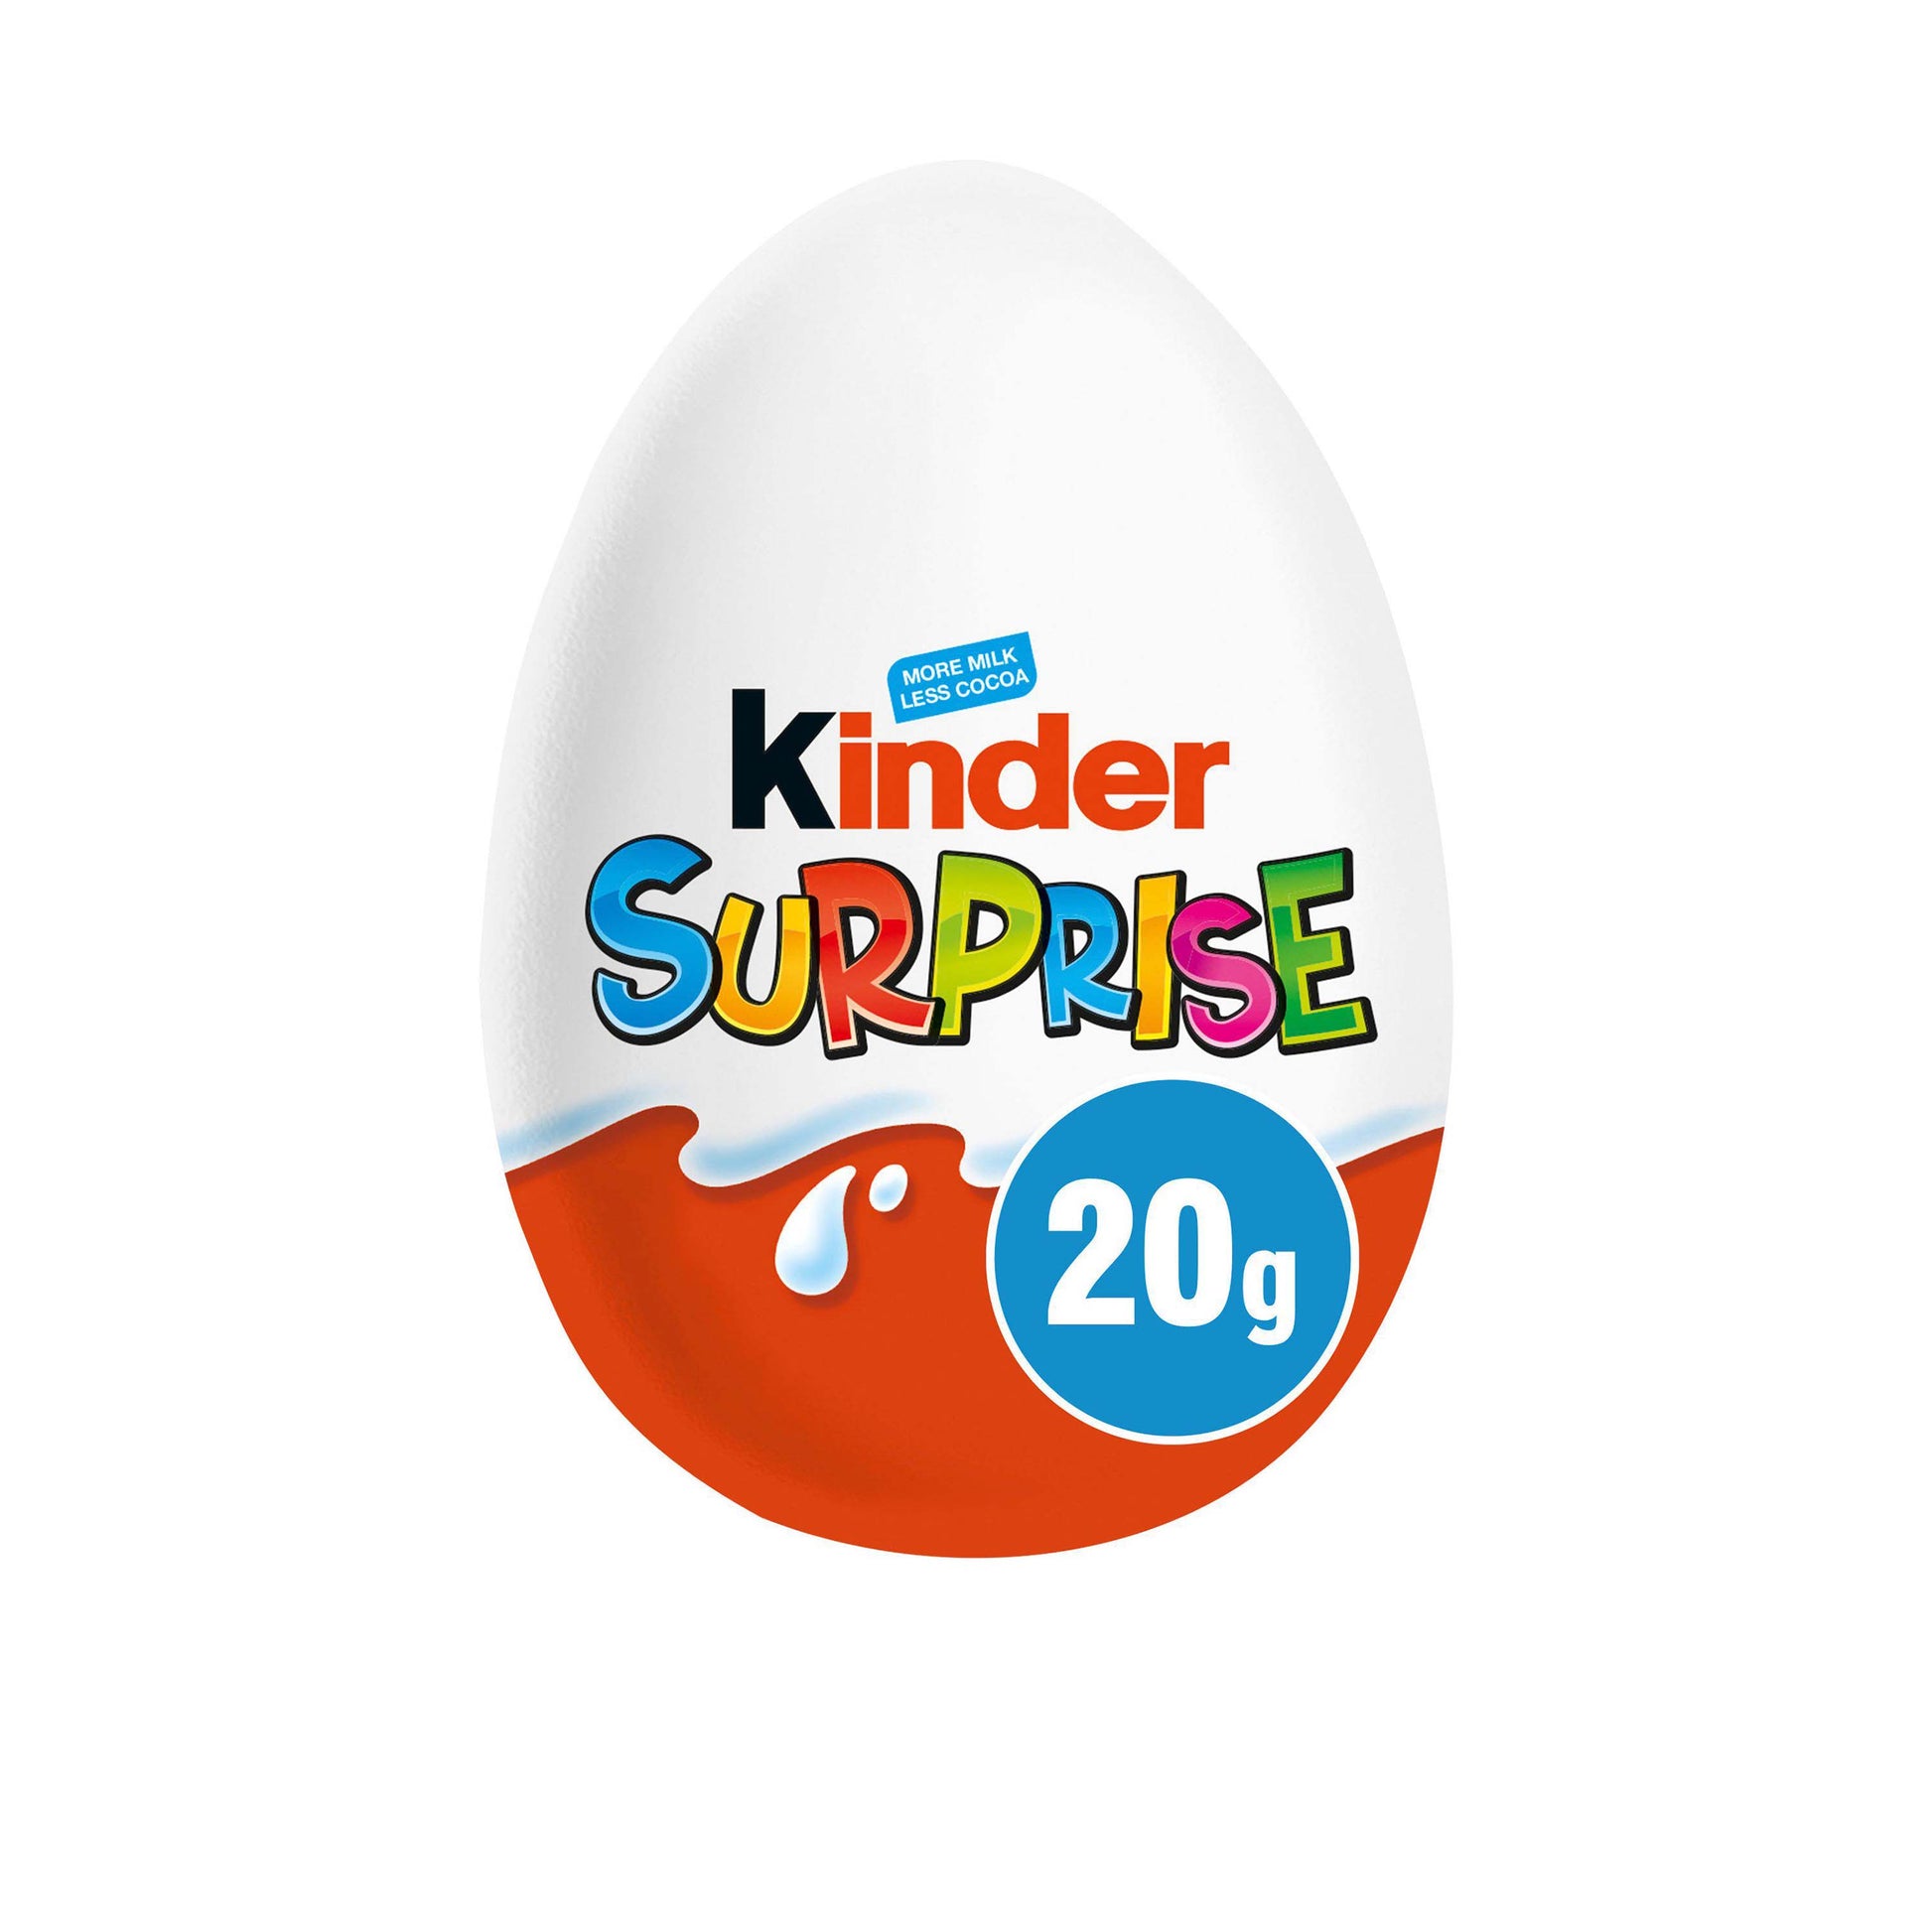 Kinder Surprise Chocolate Egg, With Gift Included Inside - 20g - BRITISH SNACKS